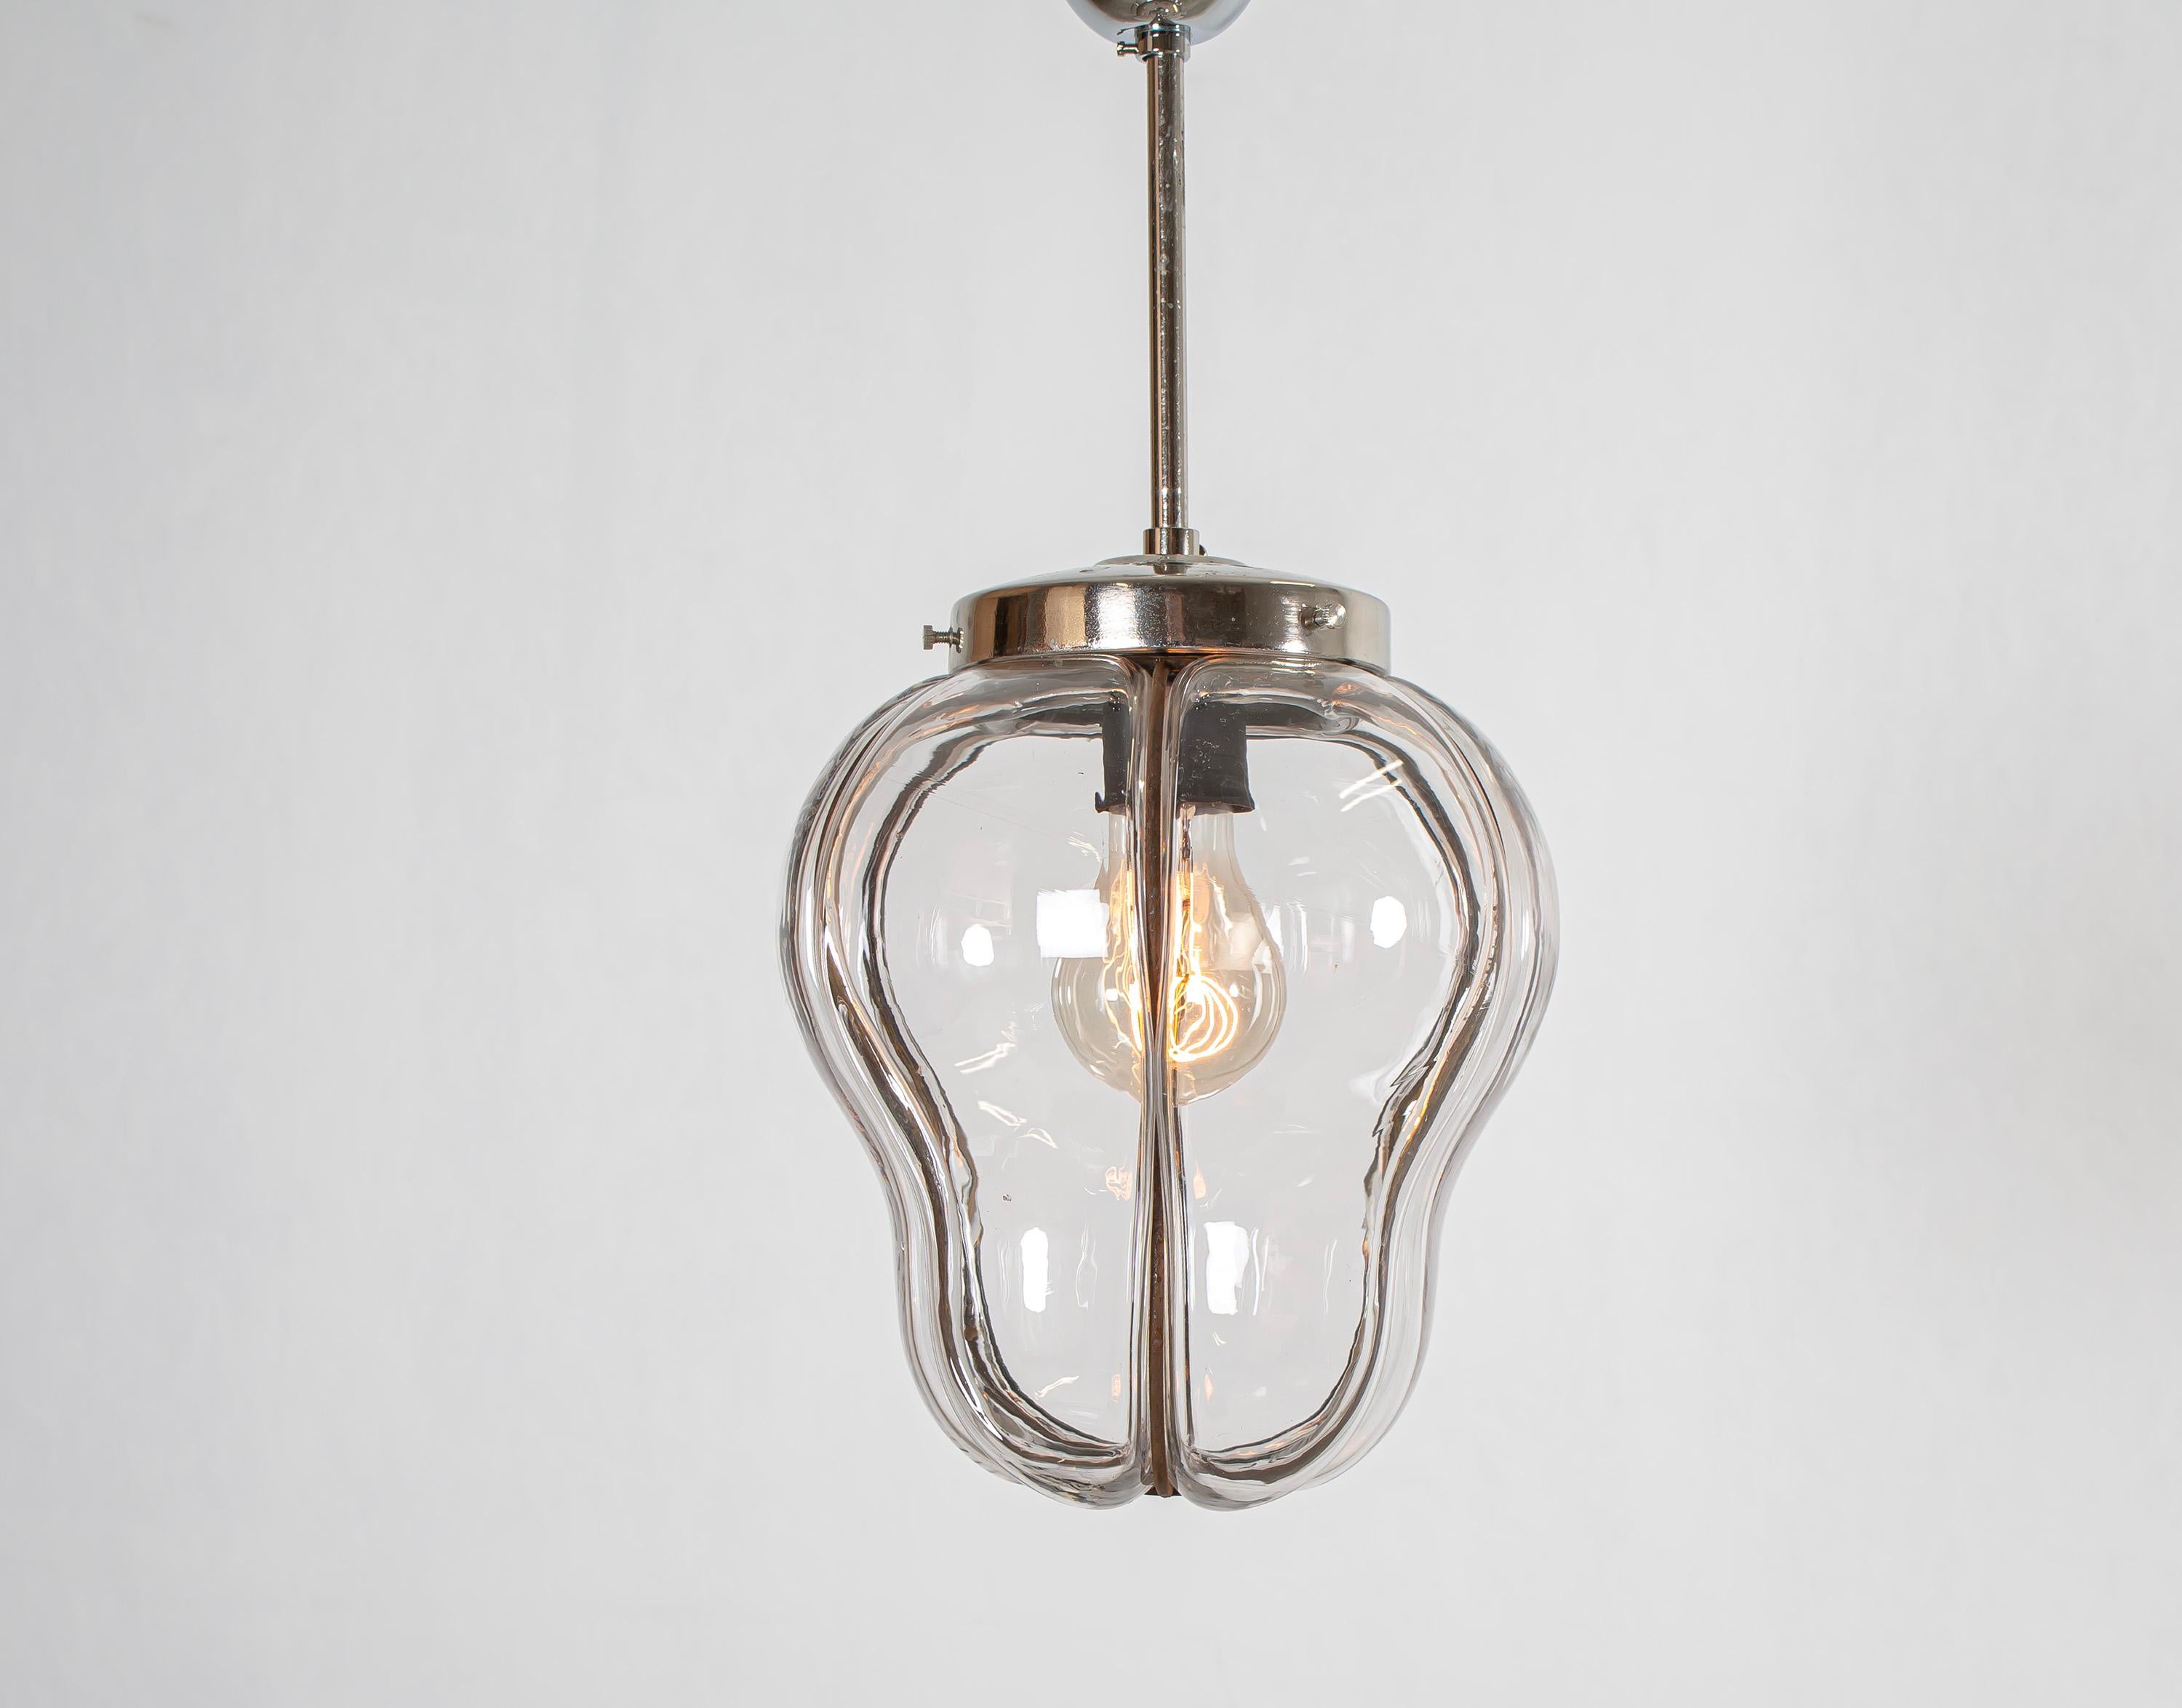 Mid-20th Century Functionalist Ceiling Light, Norway, 1950s For Sale